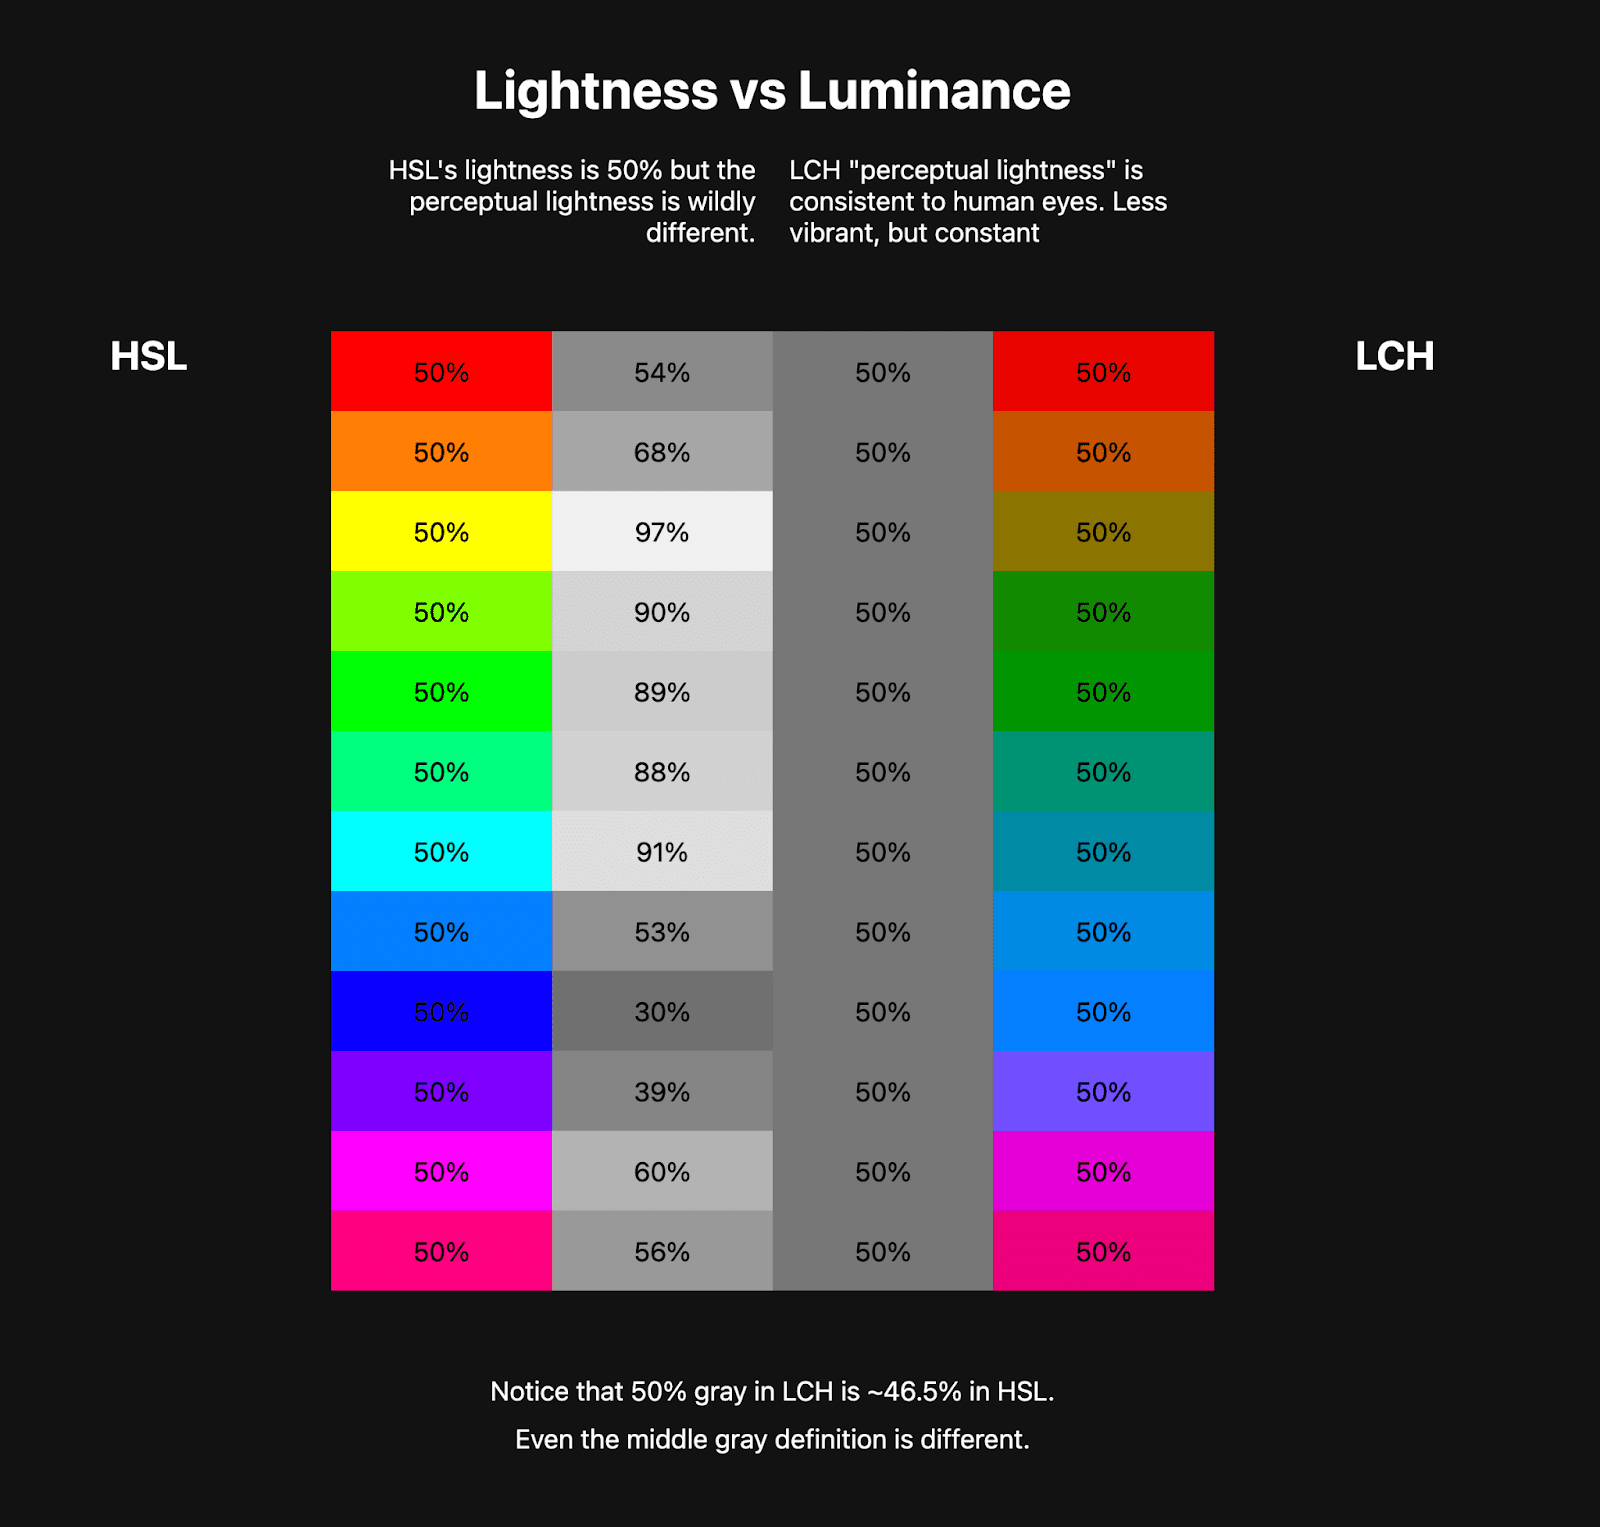 Two tables of color are side by side. The first table shows an HSL
    rainbow of 10 colors or so and next to it are grayscale colors that represent
    the lightness of those HSL colors. The second table shows an LCH rainbow,
    much less vibrant, but the grayscale colors next to it are consistent.
    This is showing how LCH has a healthy constant lightness value while HSL does not.